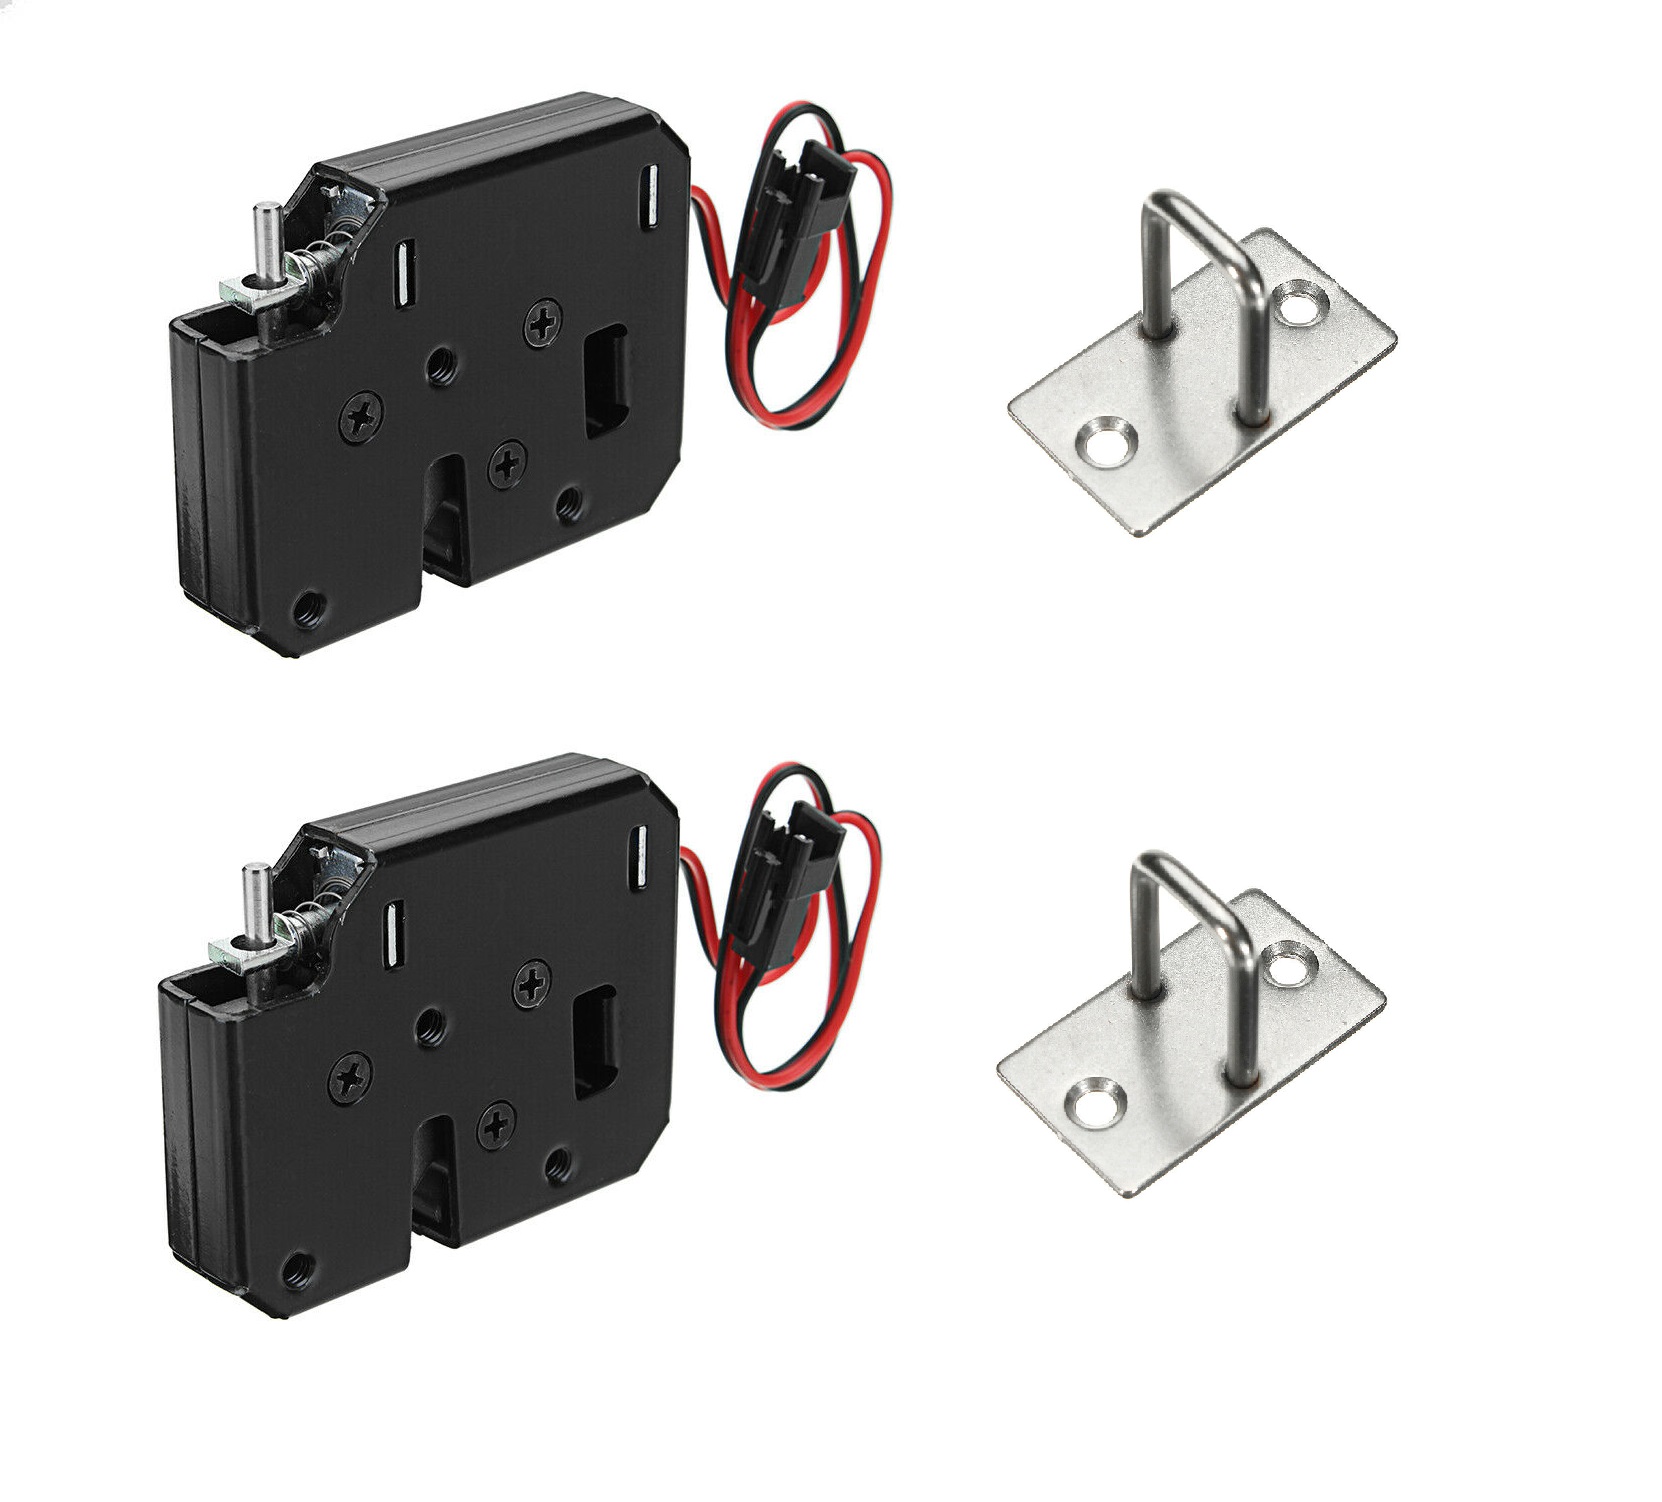 12V Intelligent Electric Solenoid Lock for Automatic Cabinet Door Sell-Machine (2 PCS)